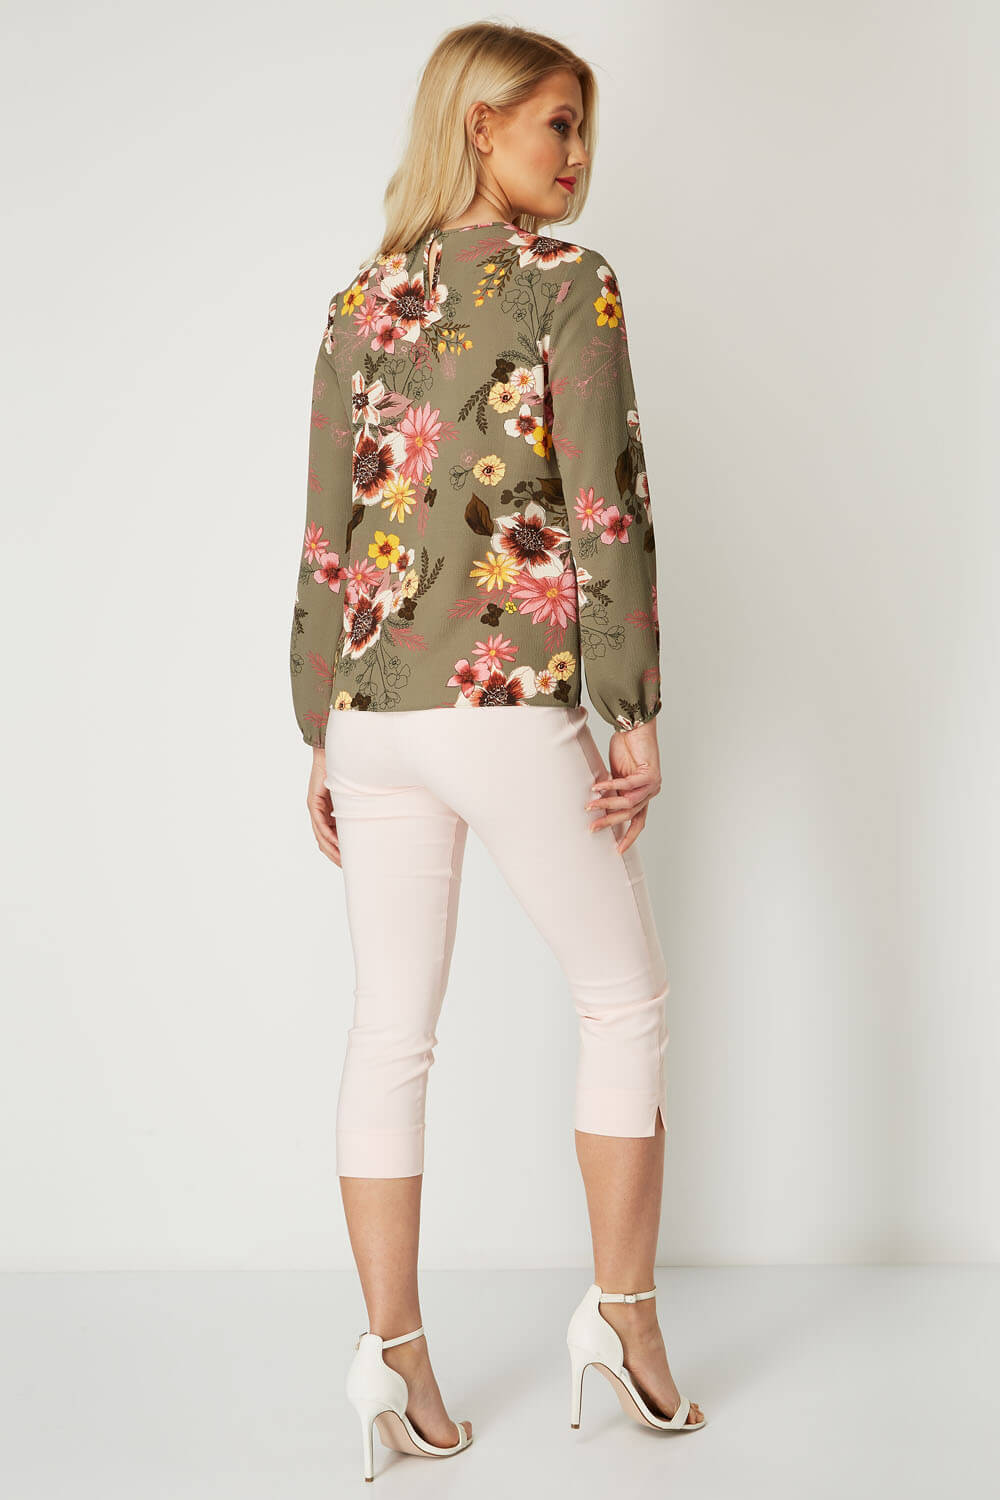 KHAKI Floral Tie Front Top, Image 3 of 8